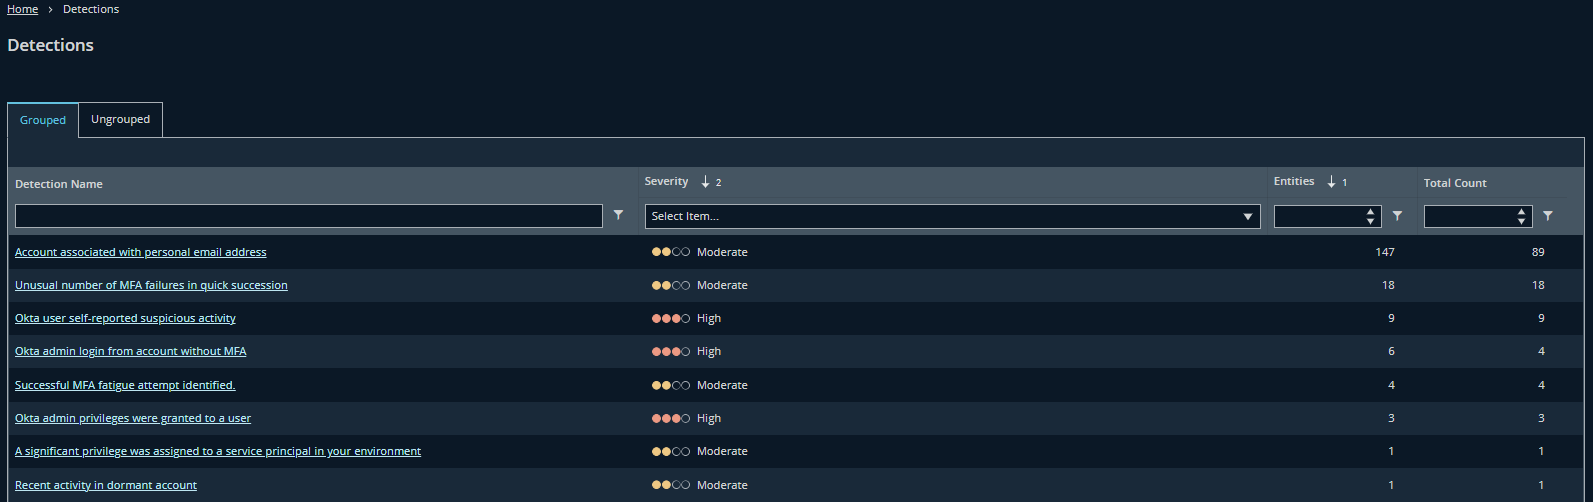 The Detections page, with a list of possible detections displayed.